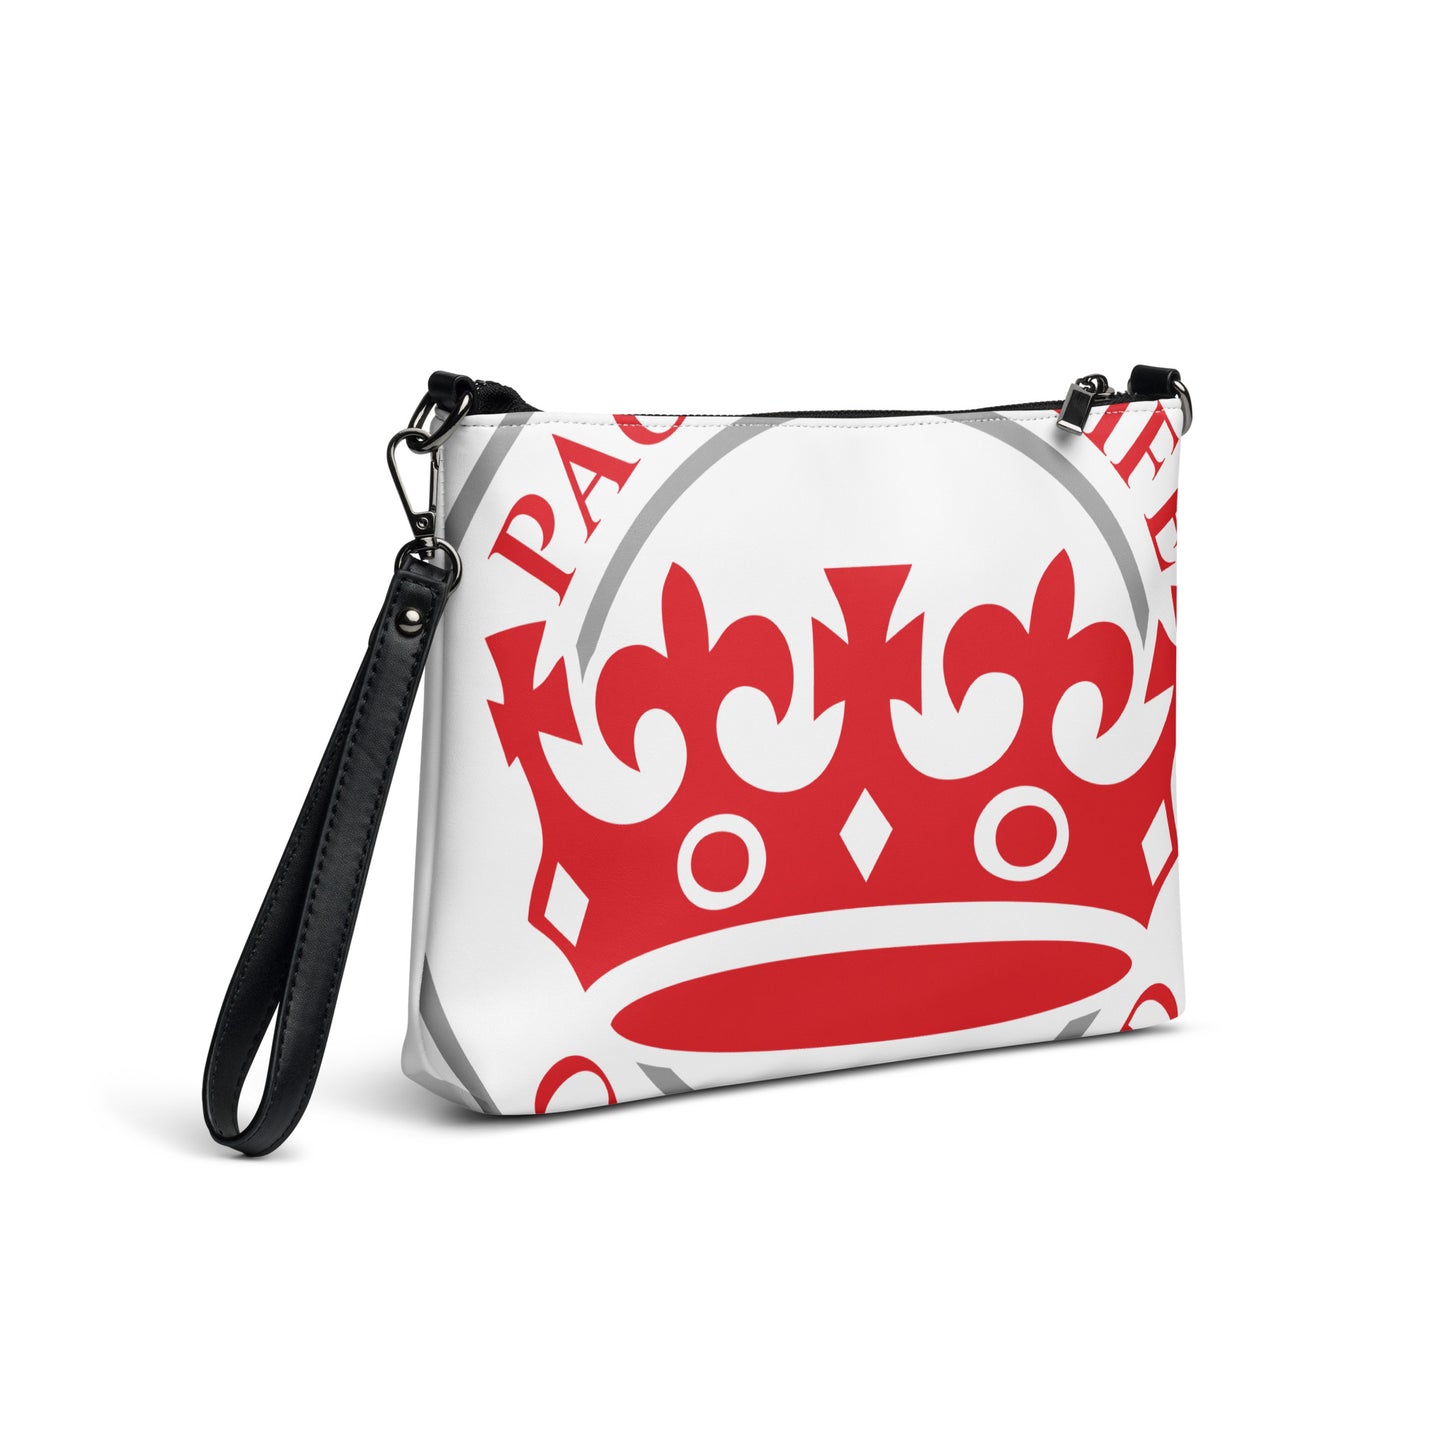 Red Silver and White Pageant Life Certified Crossbody bag